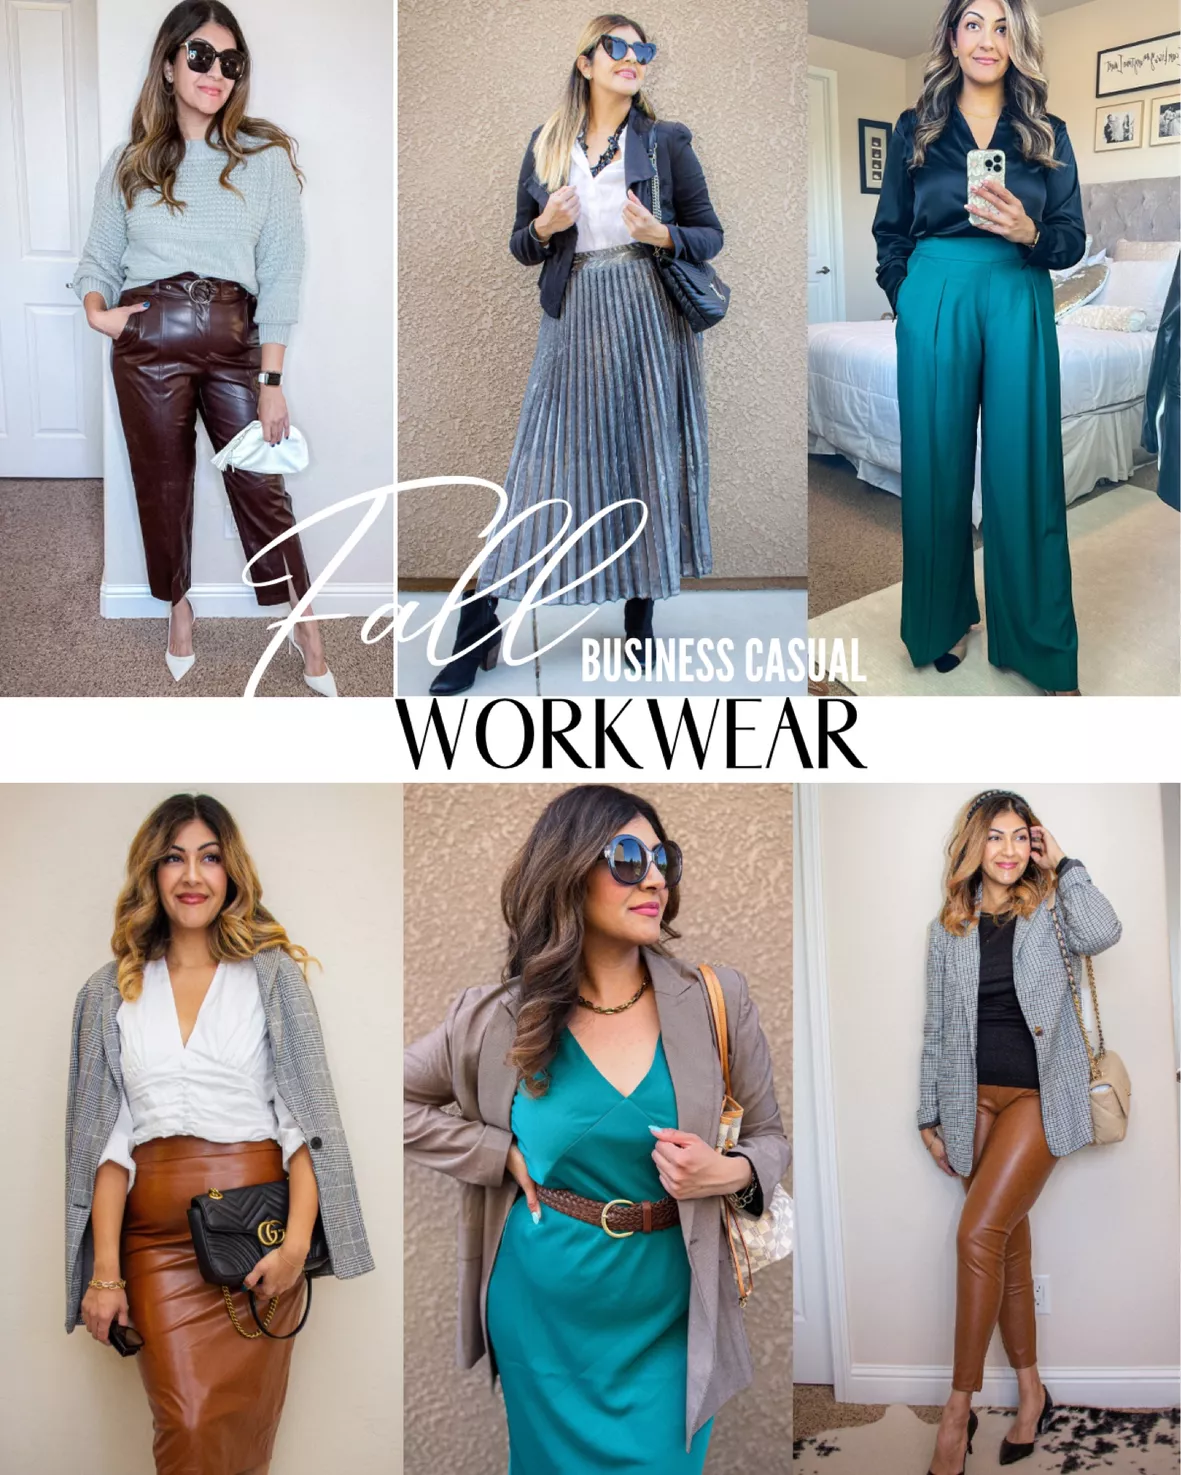 How to Wear Leather Leggings to Work  Outfits with leggings, Leggings at  work, Wear to work dress